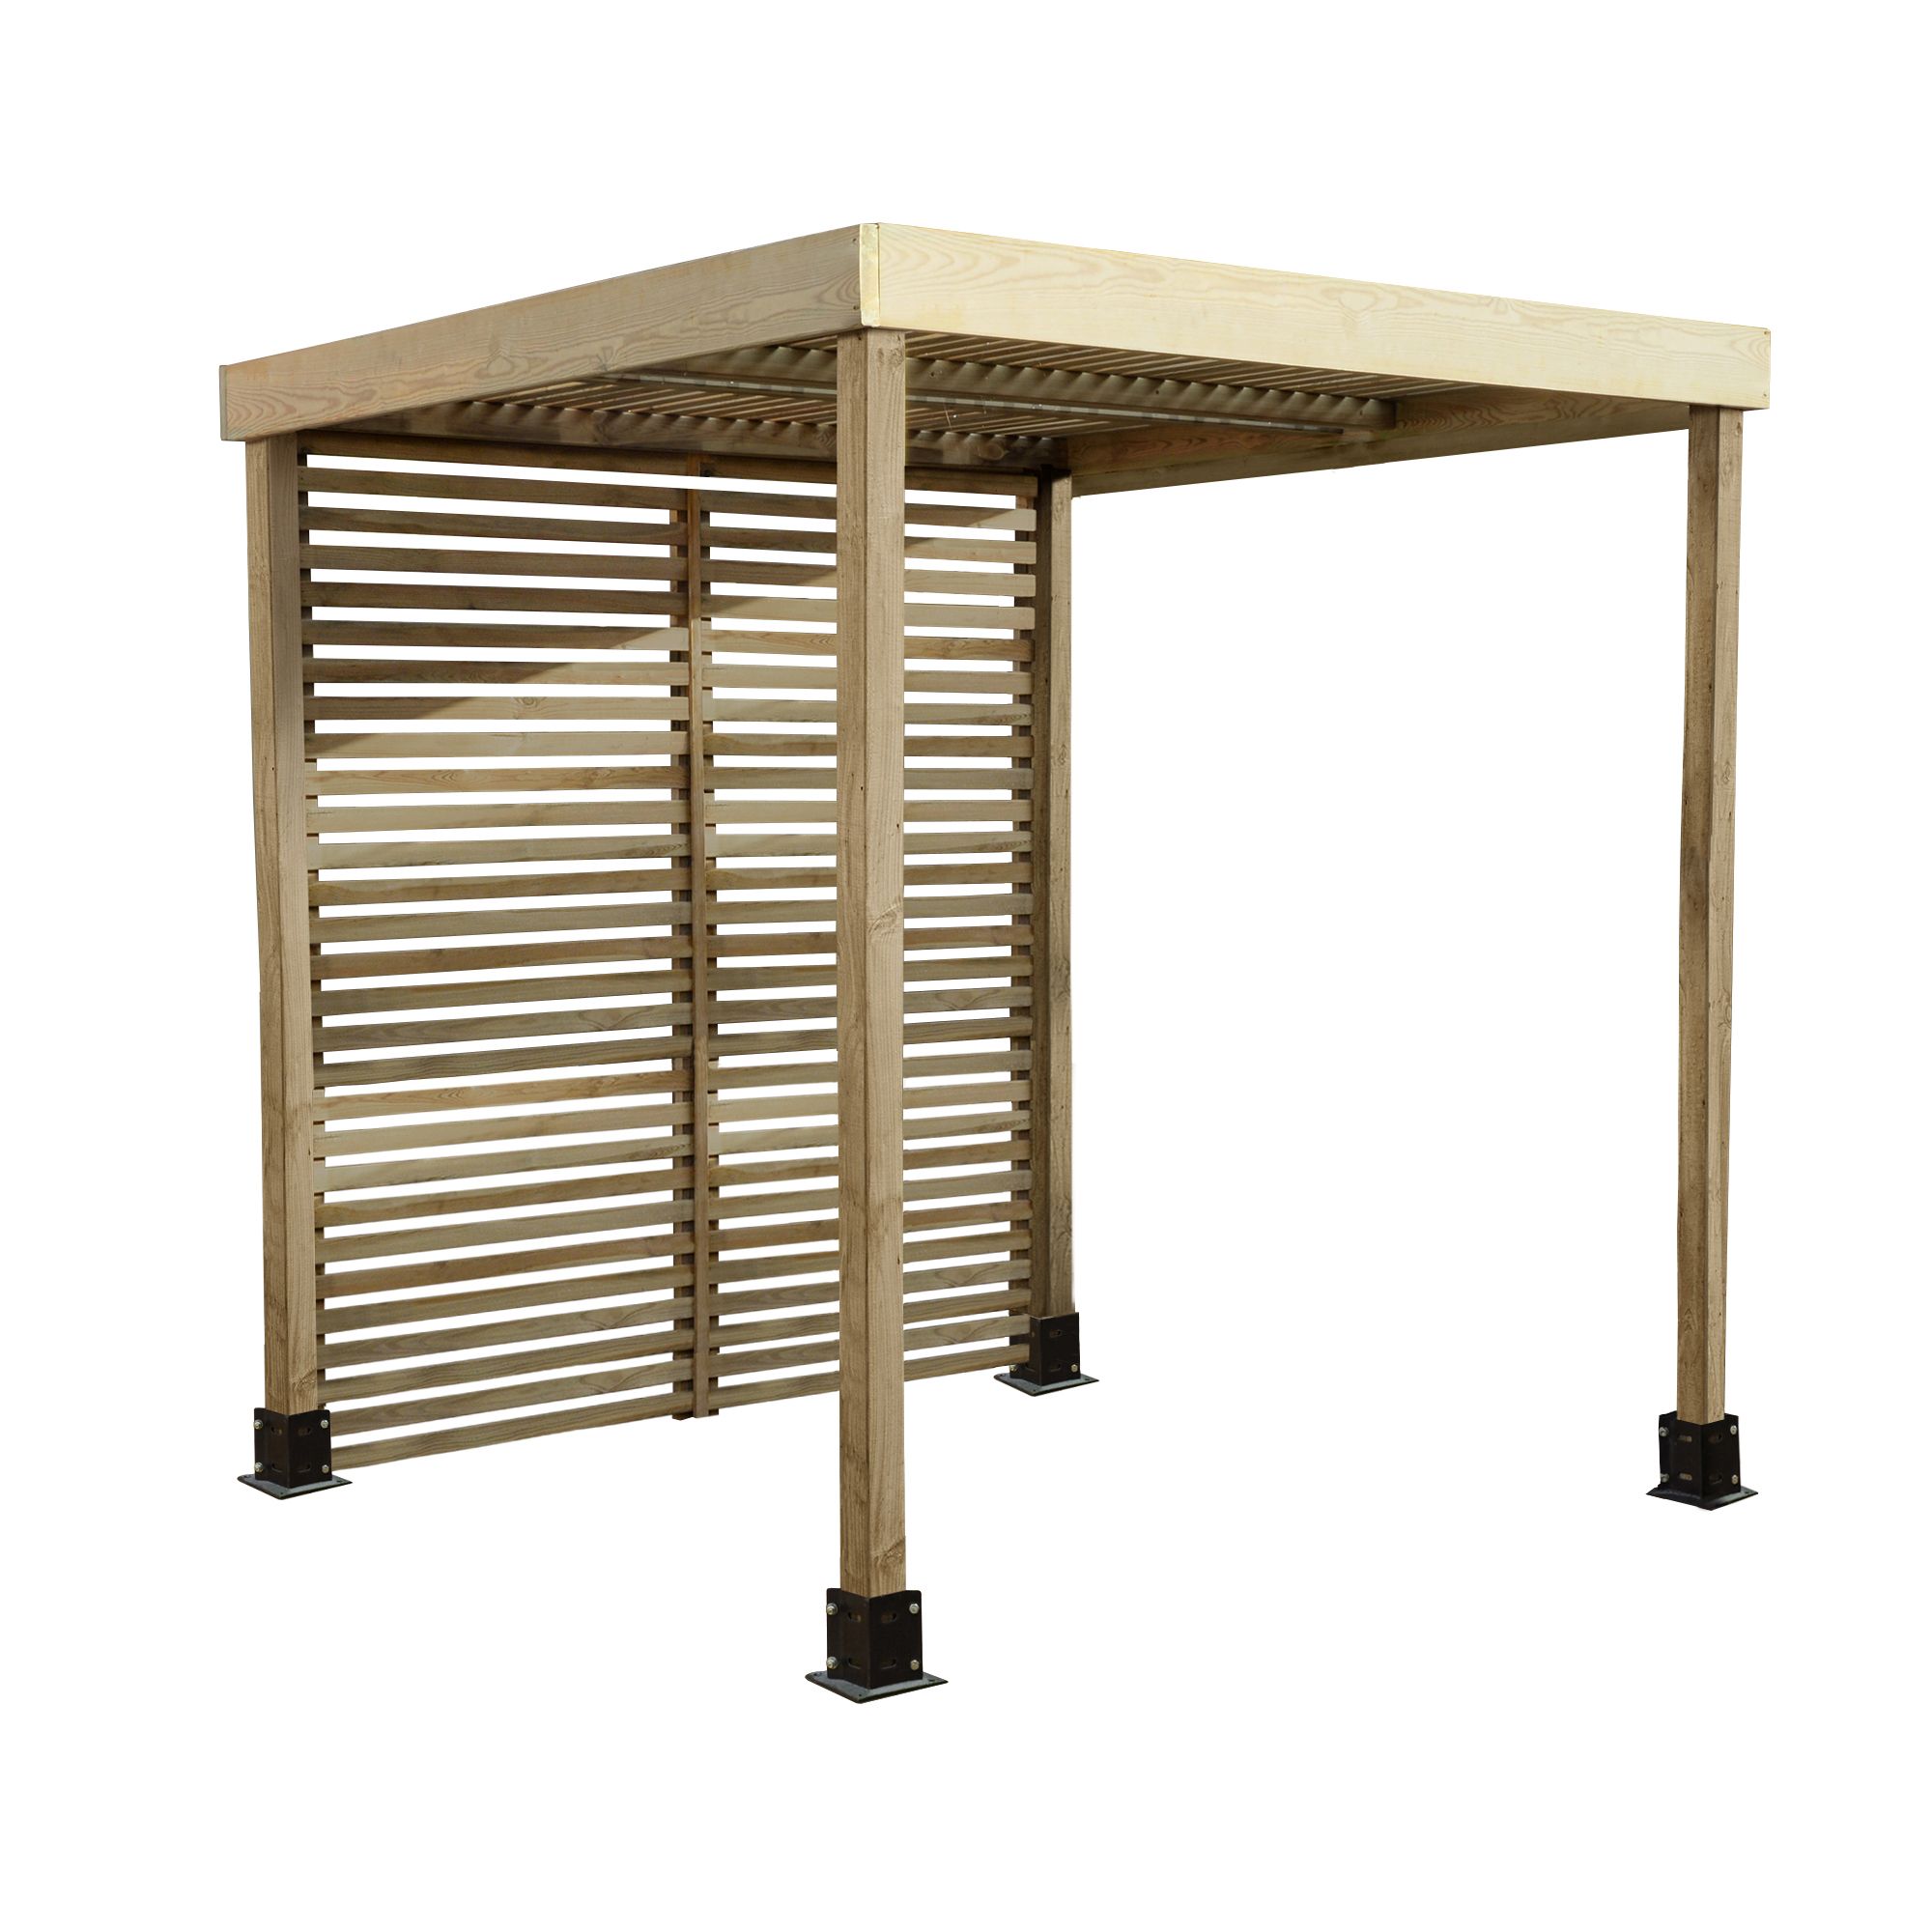 Forest Garden Modular Square Pergola, (H)2045mm (W)1970mm with 1 pair of screens